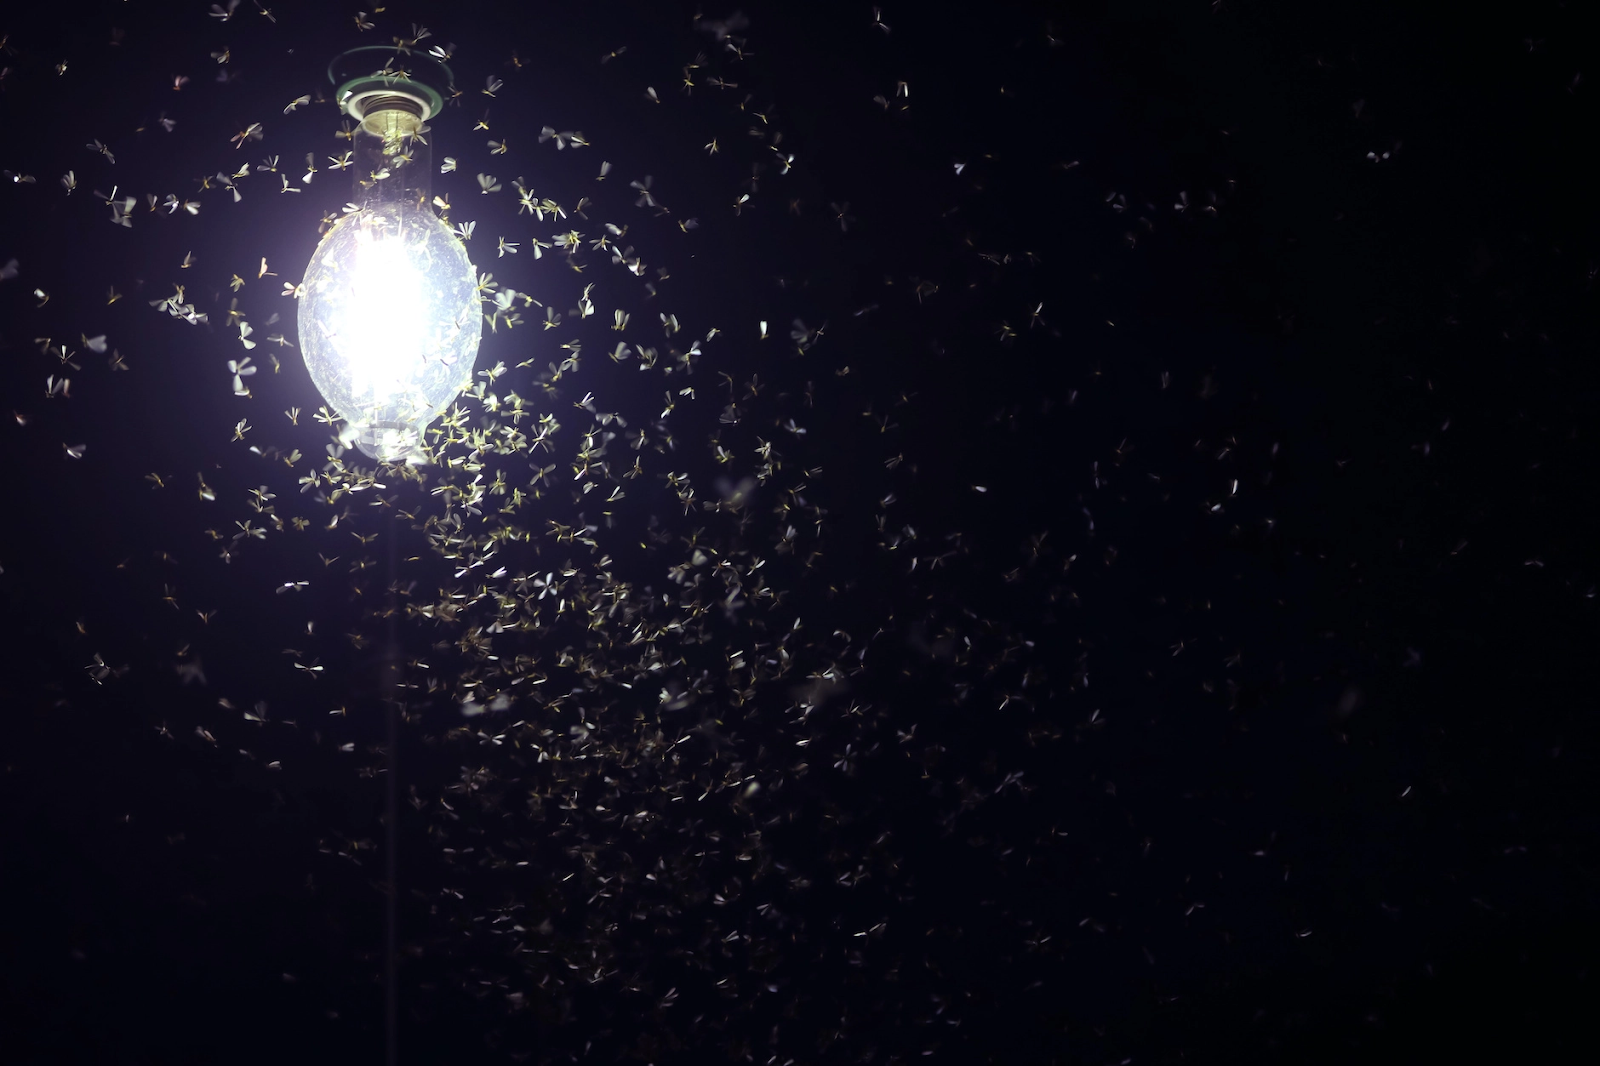 Insects attracted to a bright, white light during a dark night